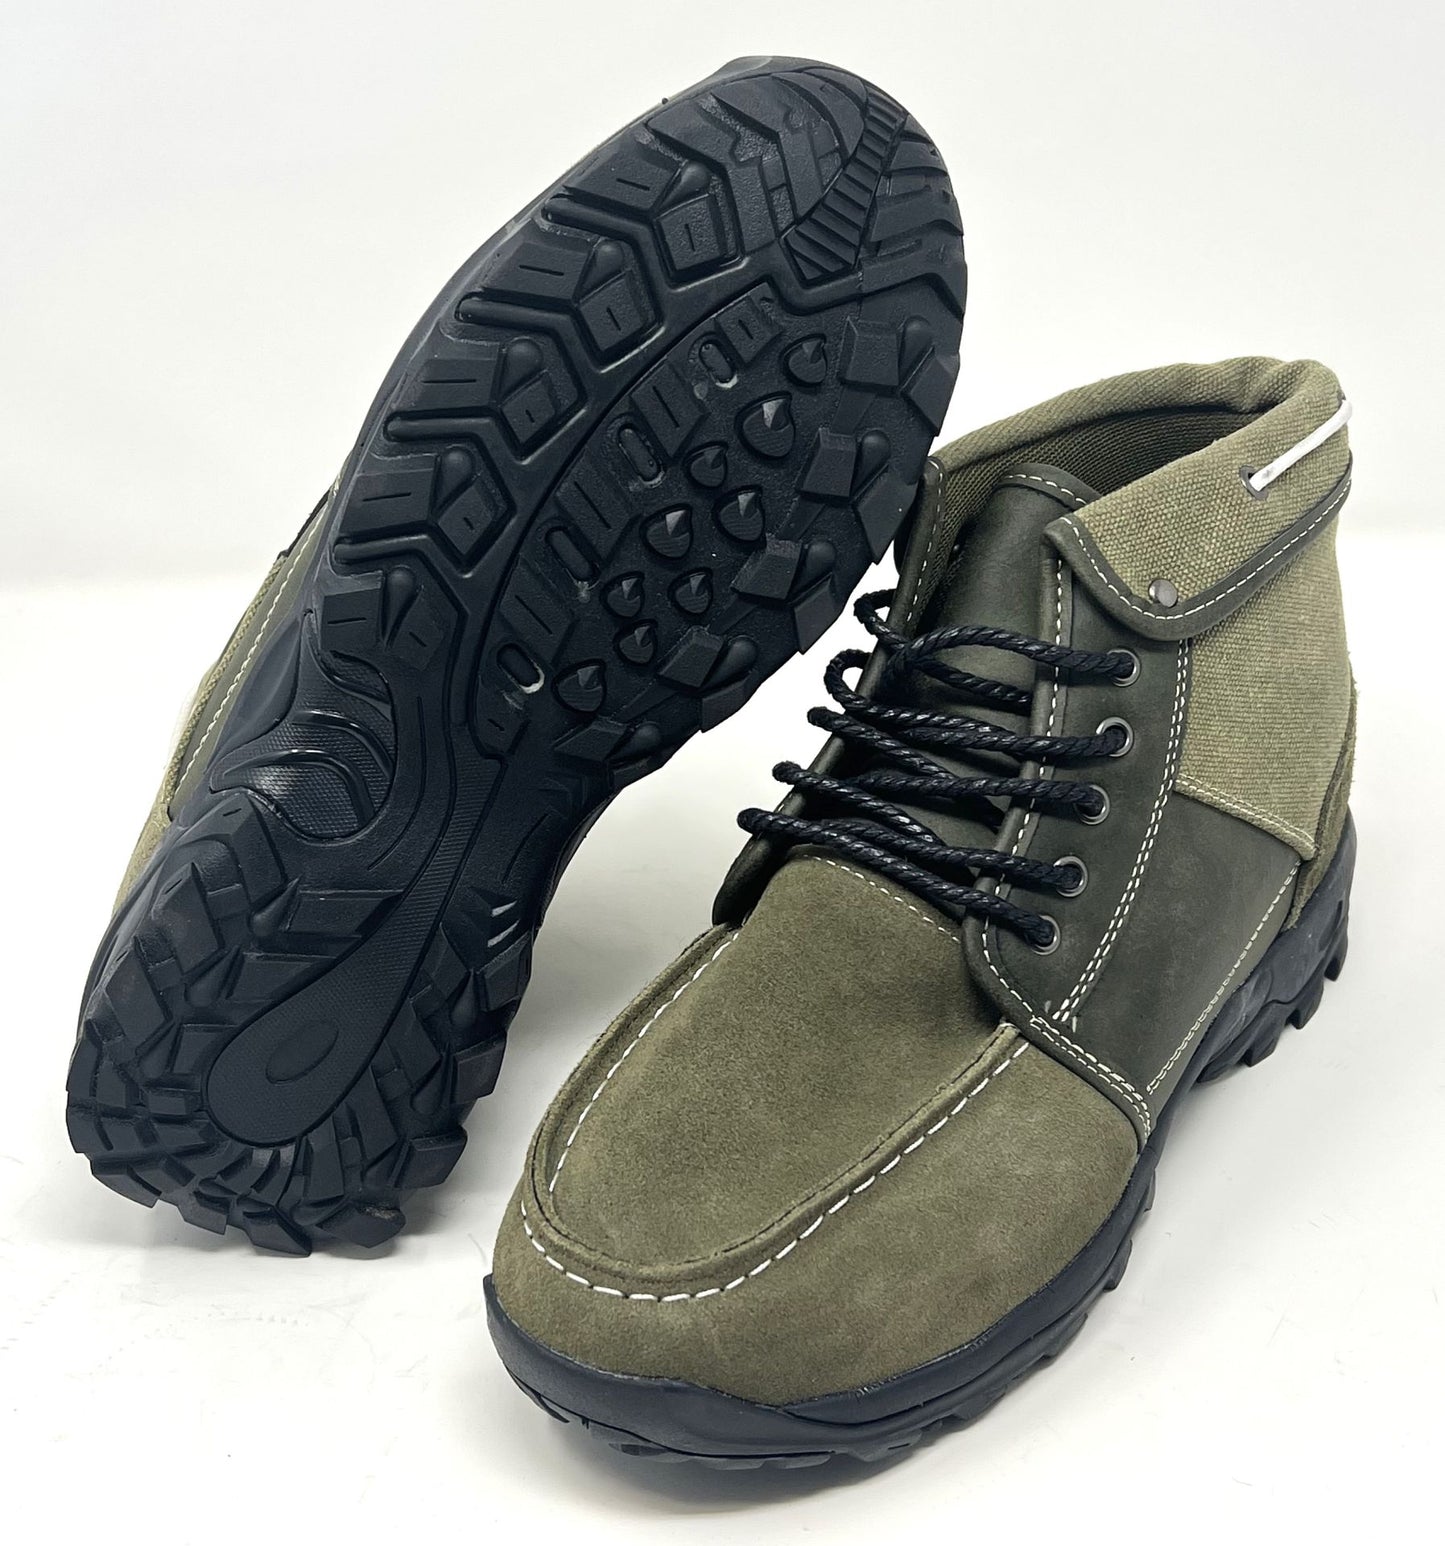 Elevator shoes height increase FSC0096 - 3.2 Inches Taller (Olive) - Size 8 Only